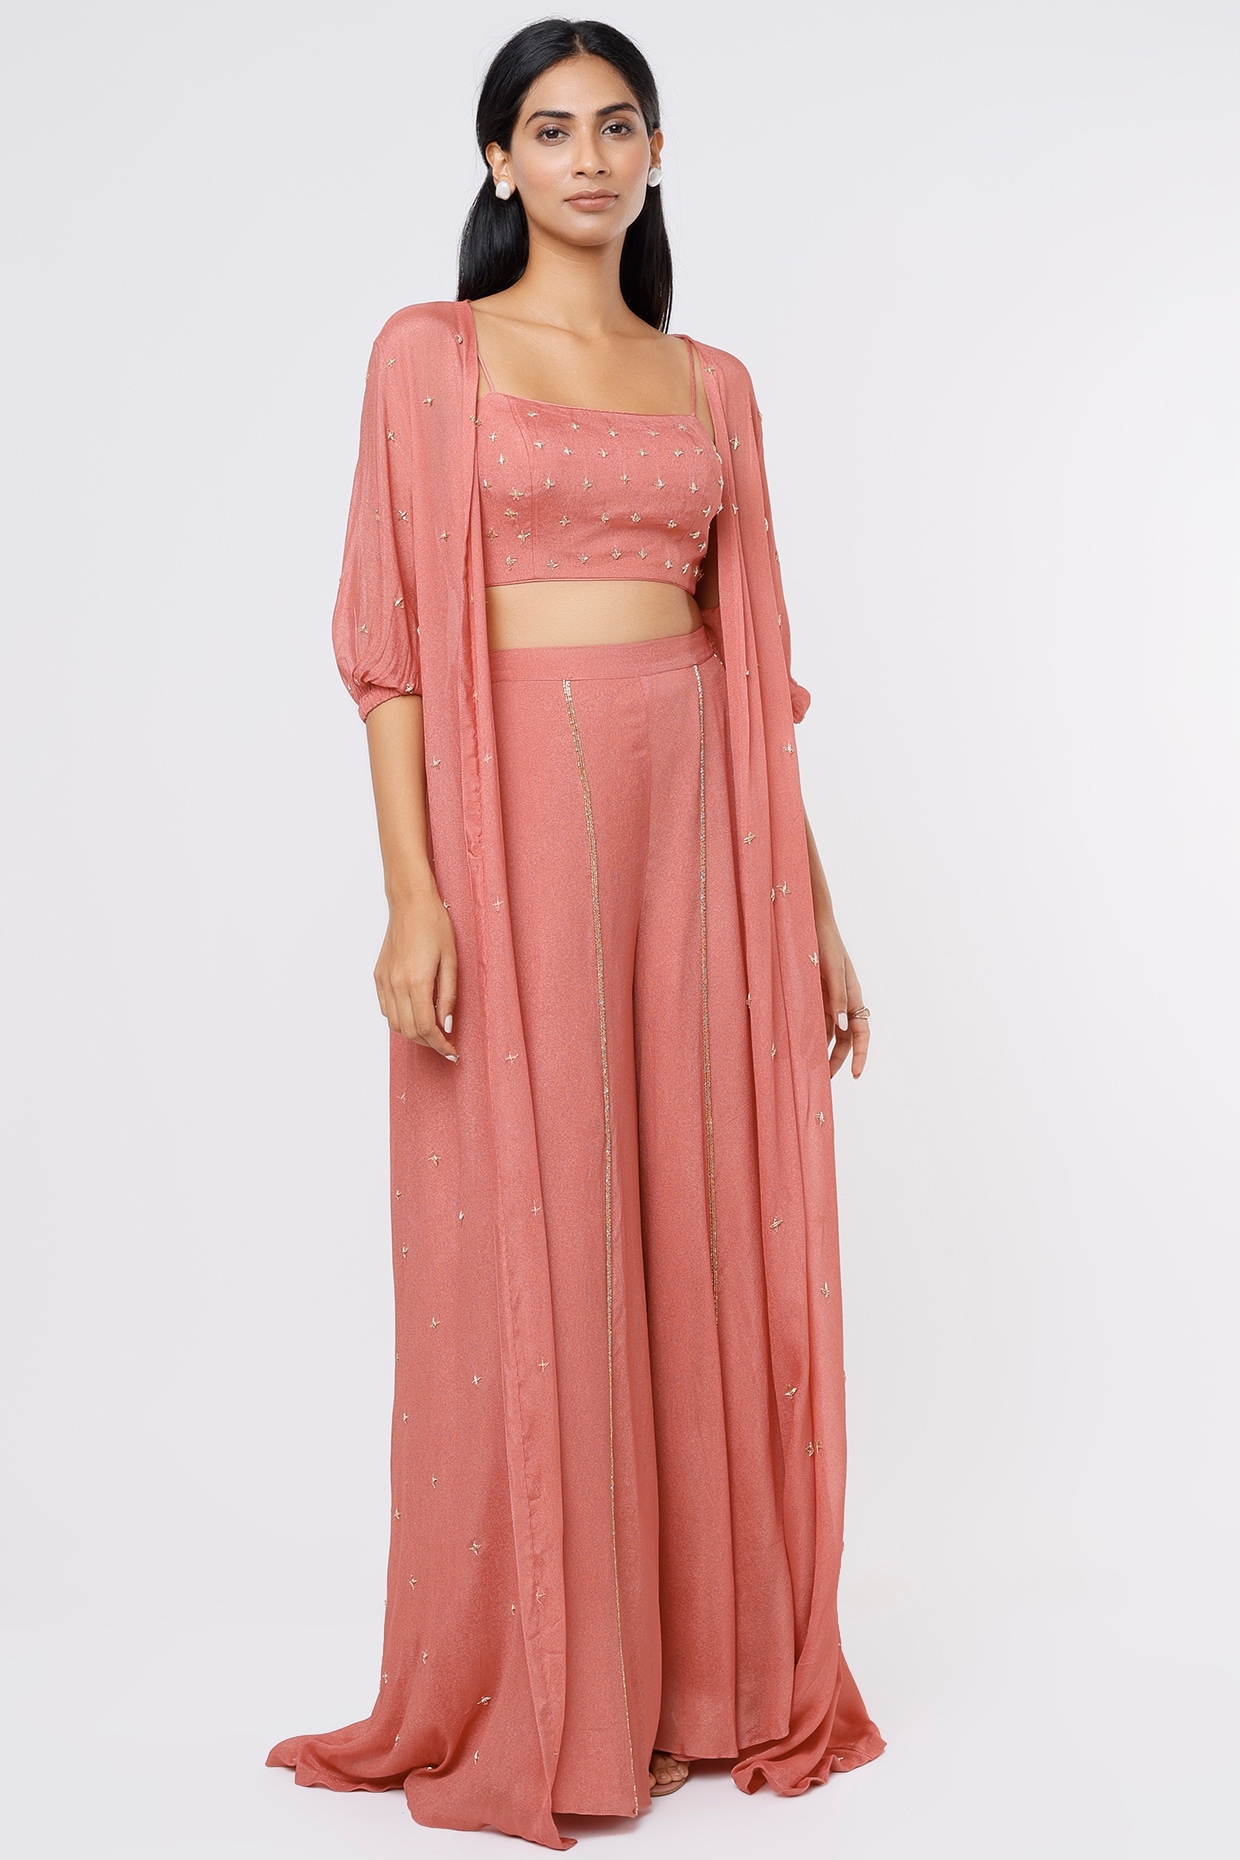 Versatile Crop Top with Palazzo Pants and Jacket Set for Women | Palazzo  pants, Festival wear, Crop top length